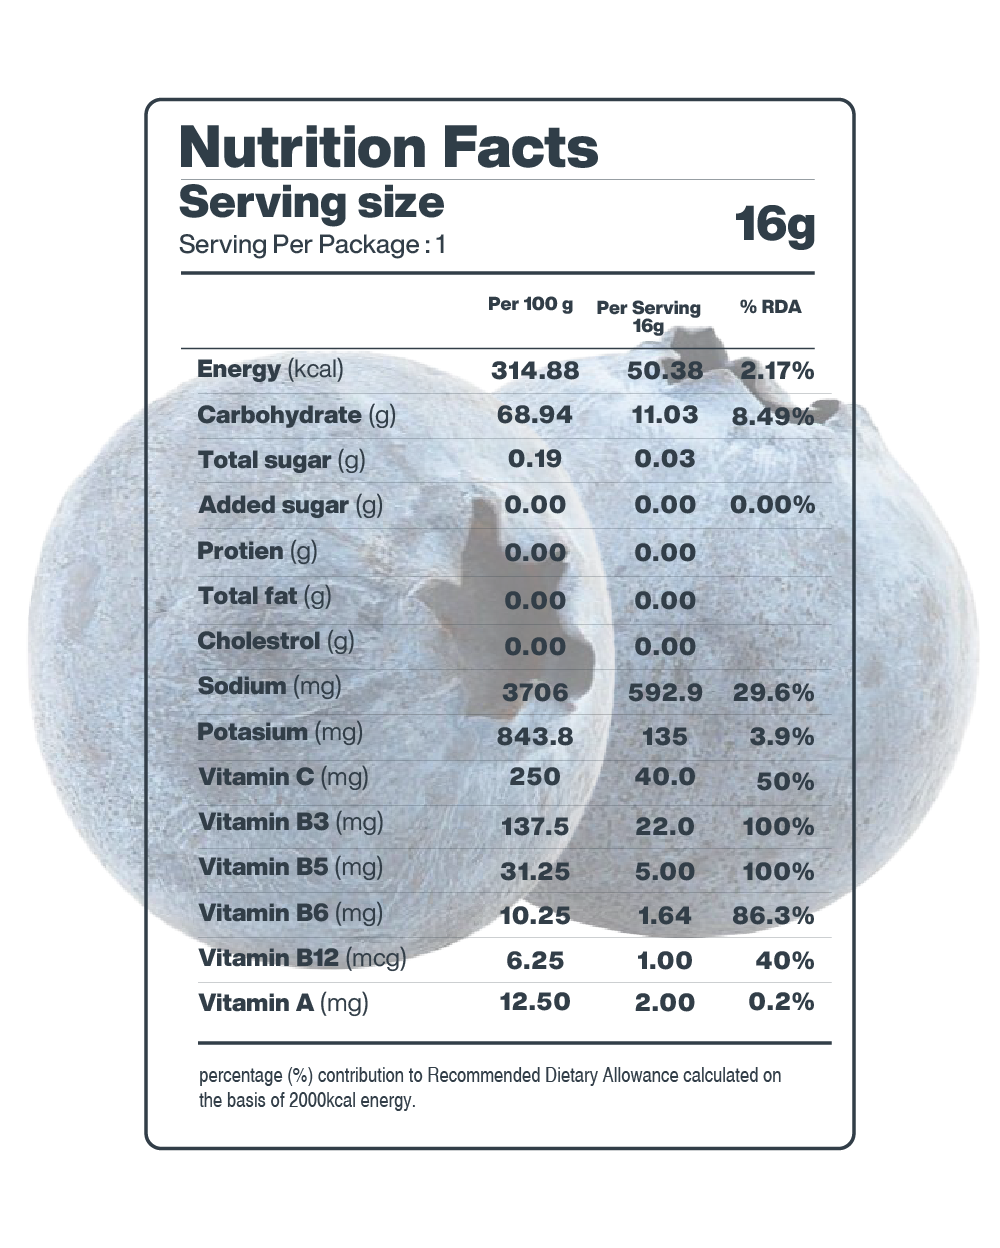 SEO-optimized Moon Blueberry Lunar Hydration Booster description with nutrition facts on a white background.